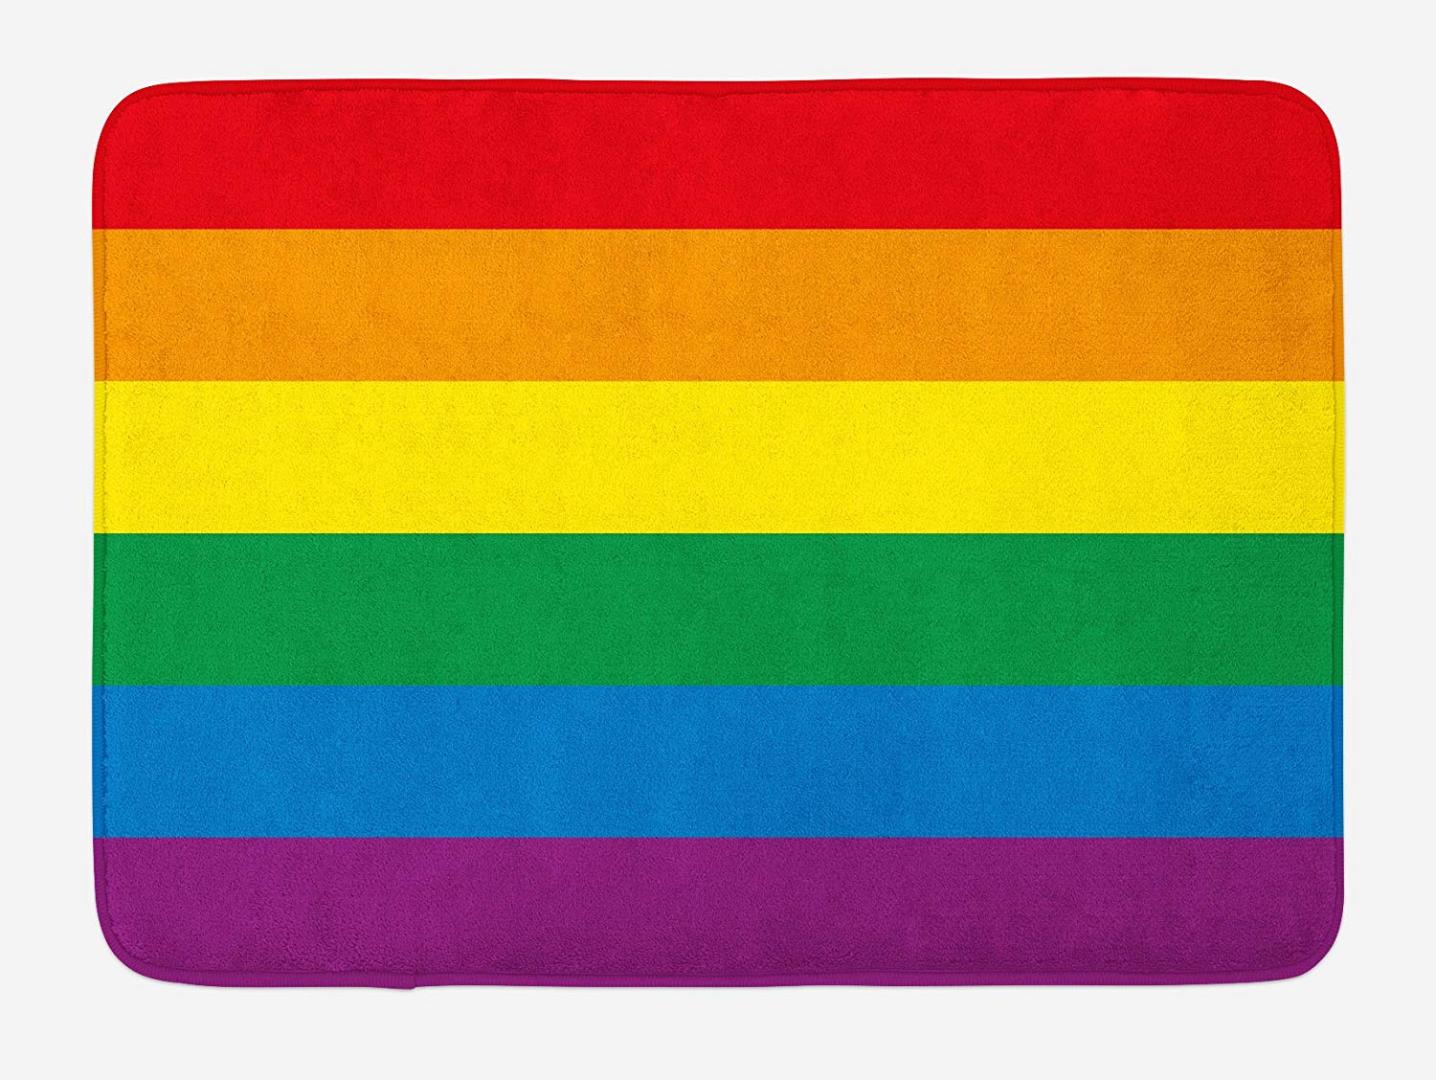 

Pride Doormat Horizontal Rainbow Colored Flag of Gay Parade Freedom Equality Love Passion Theme Home Decor Door Floor Mat Rugs, As pic